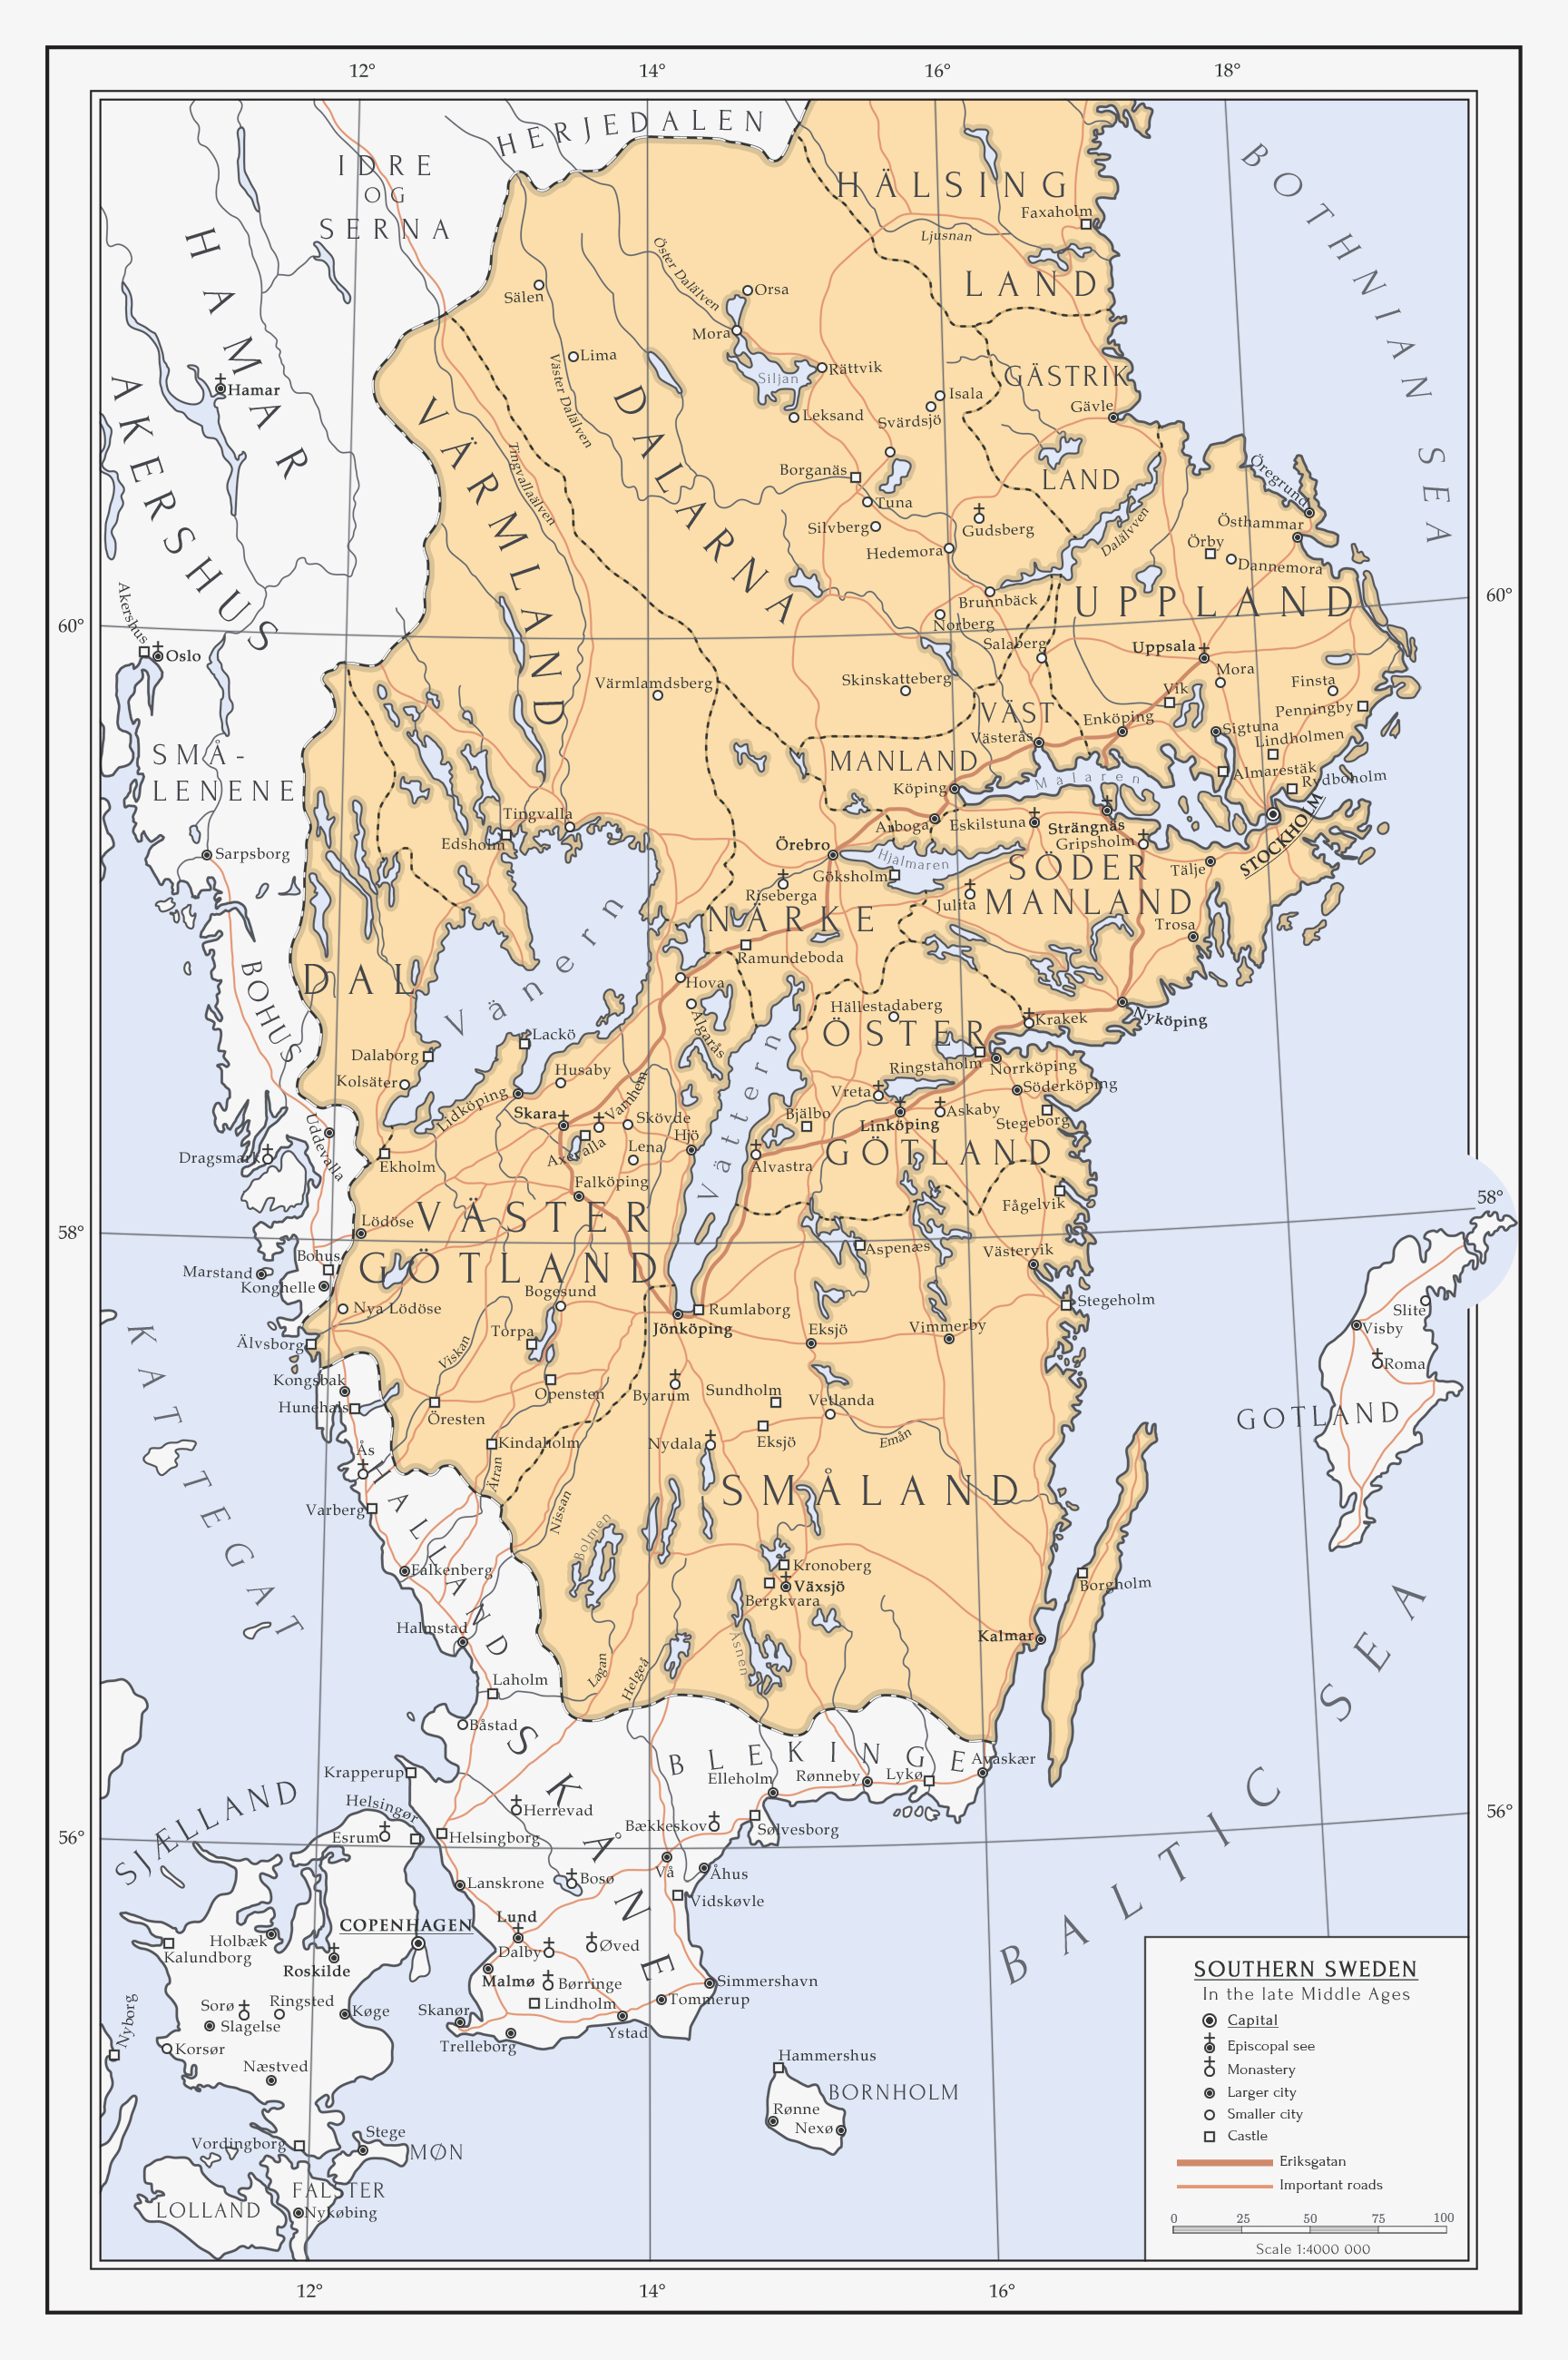 southern_sweden_in_the_late_middle_ages_by_milites_atterdag-dccp3n8.png